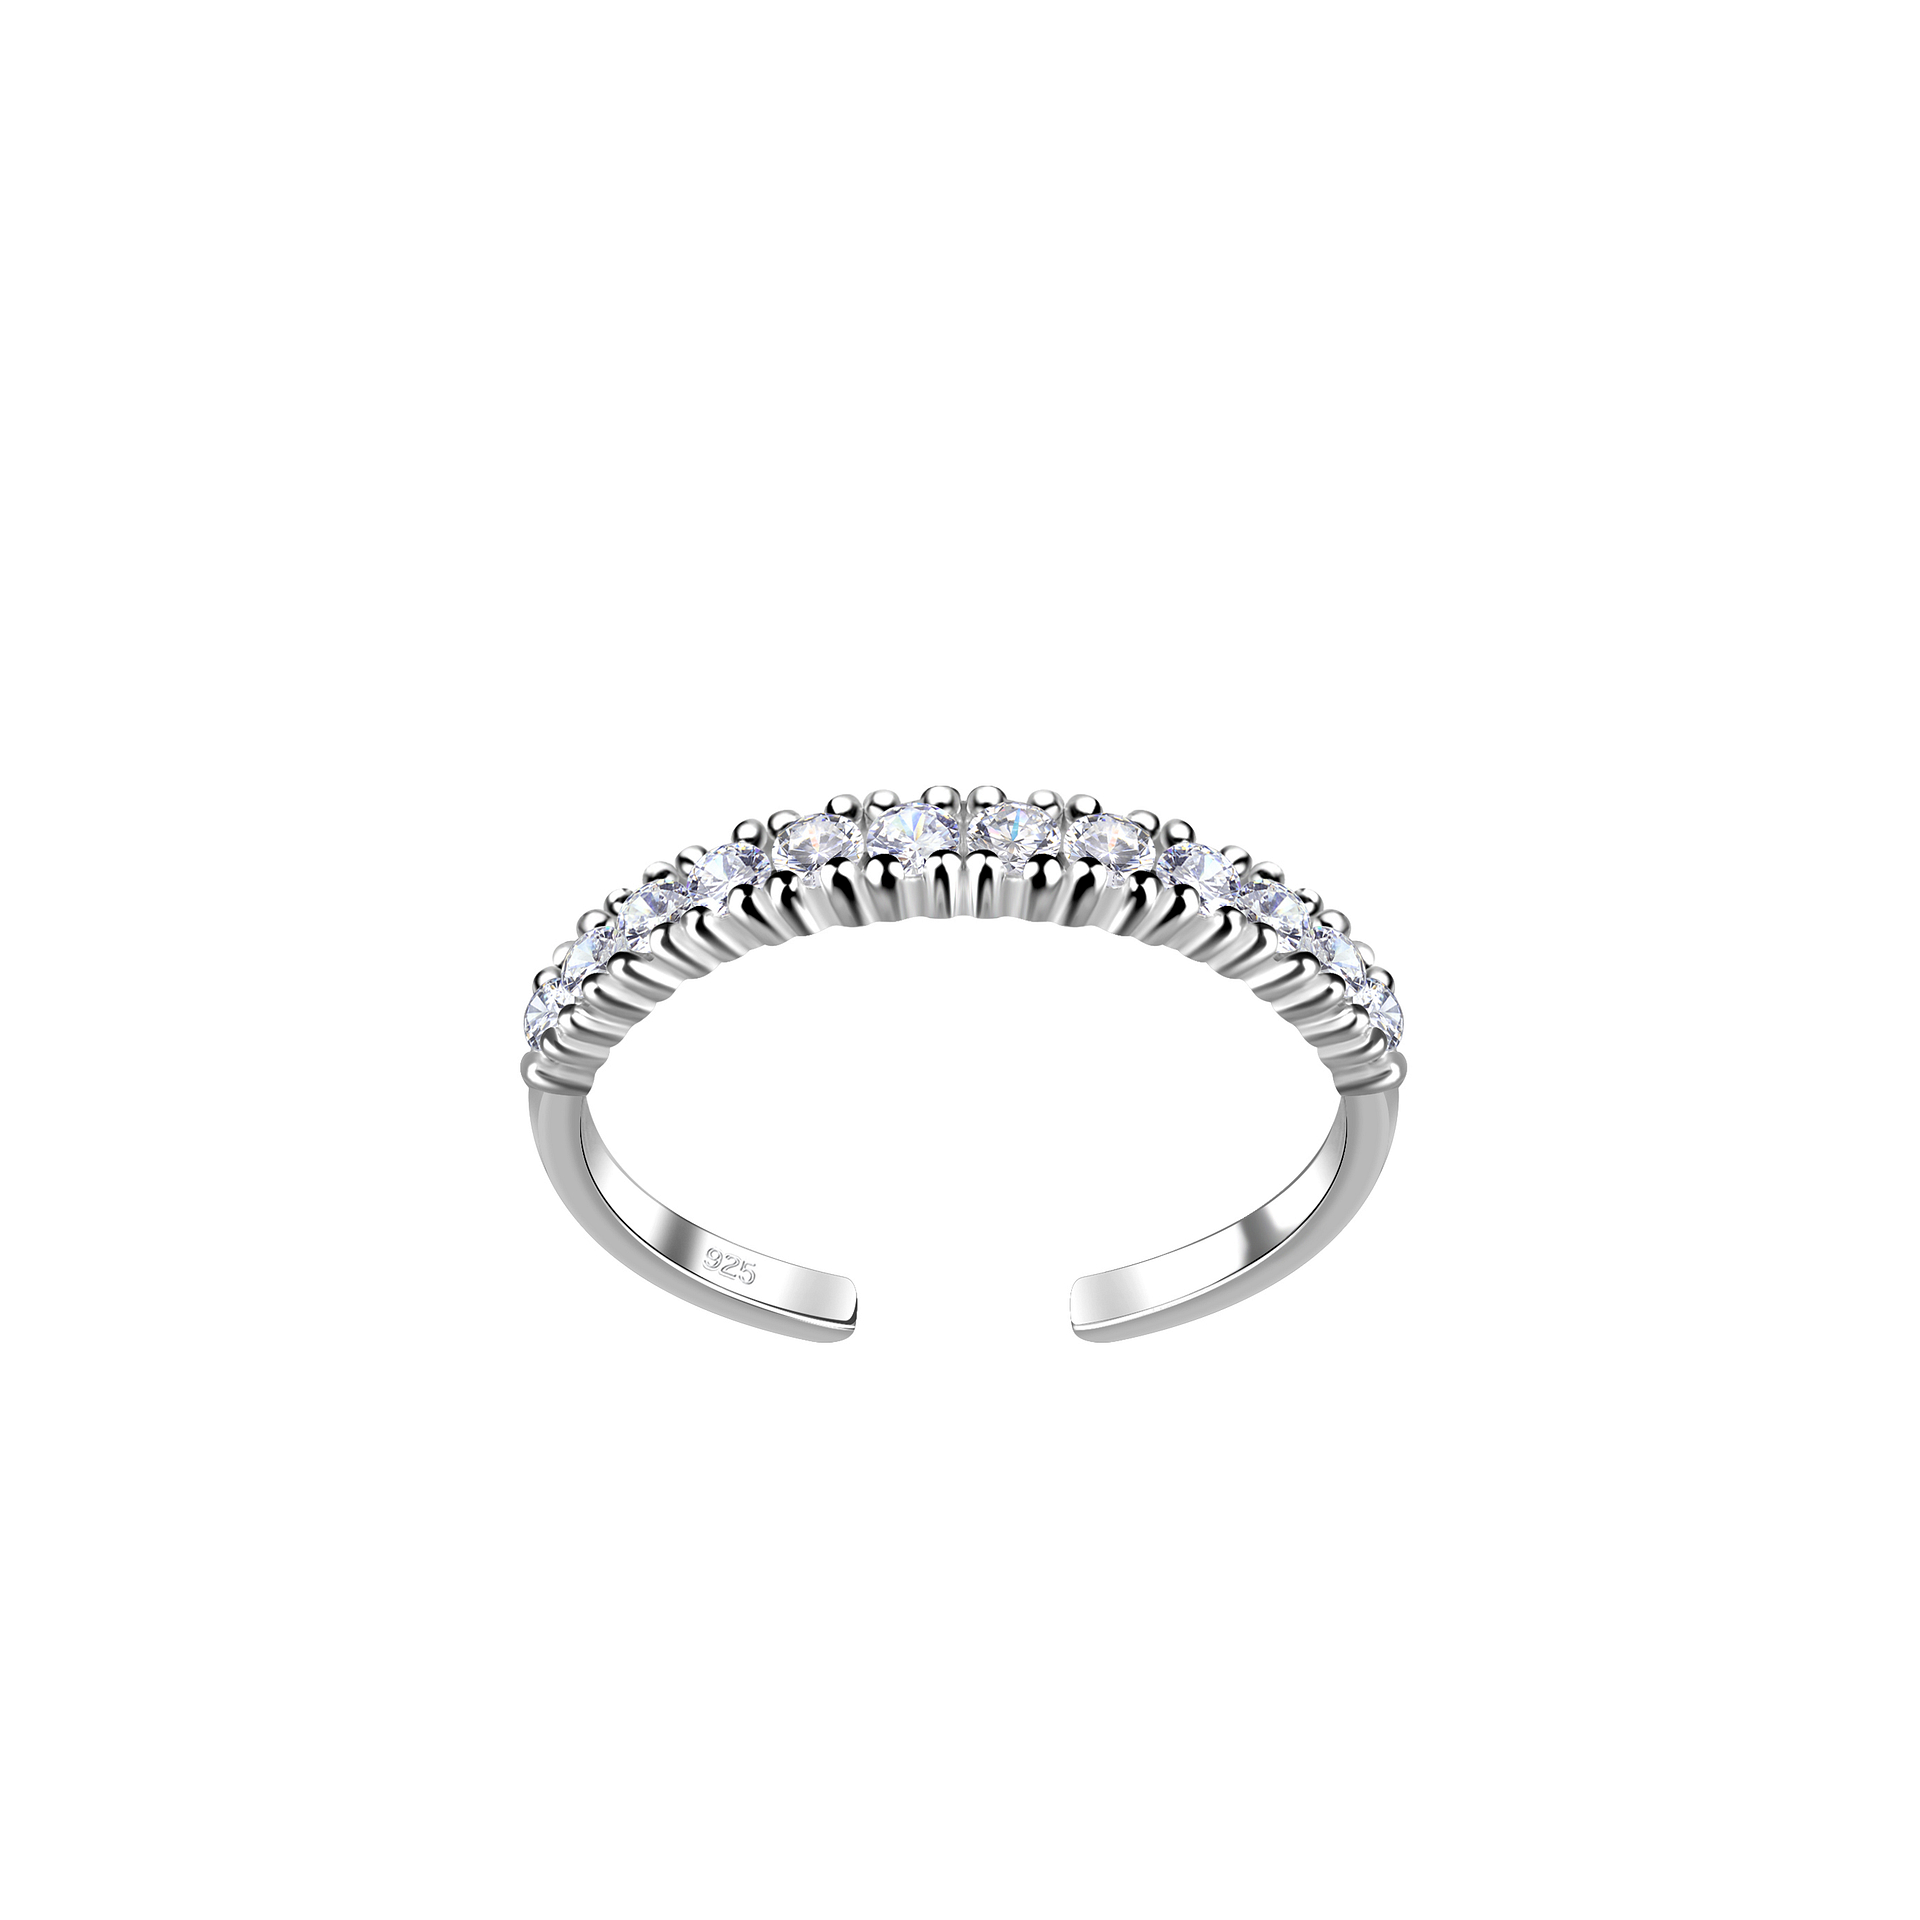 Rosny & Company Inc | Quality Wholesale Jewelry | Sale | Rhodium Plated Ring  created with Swarovski crystals